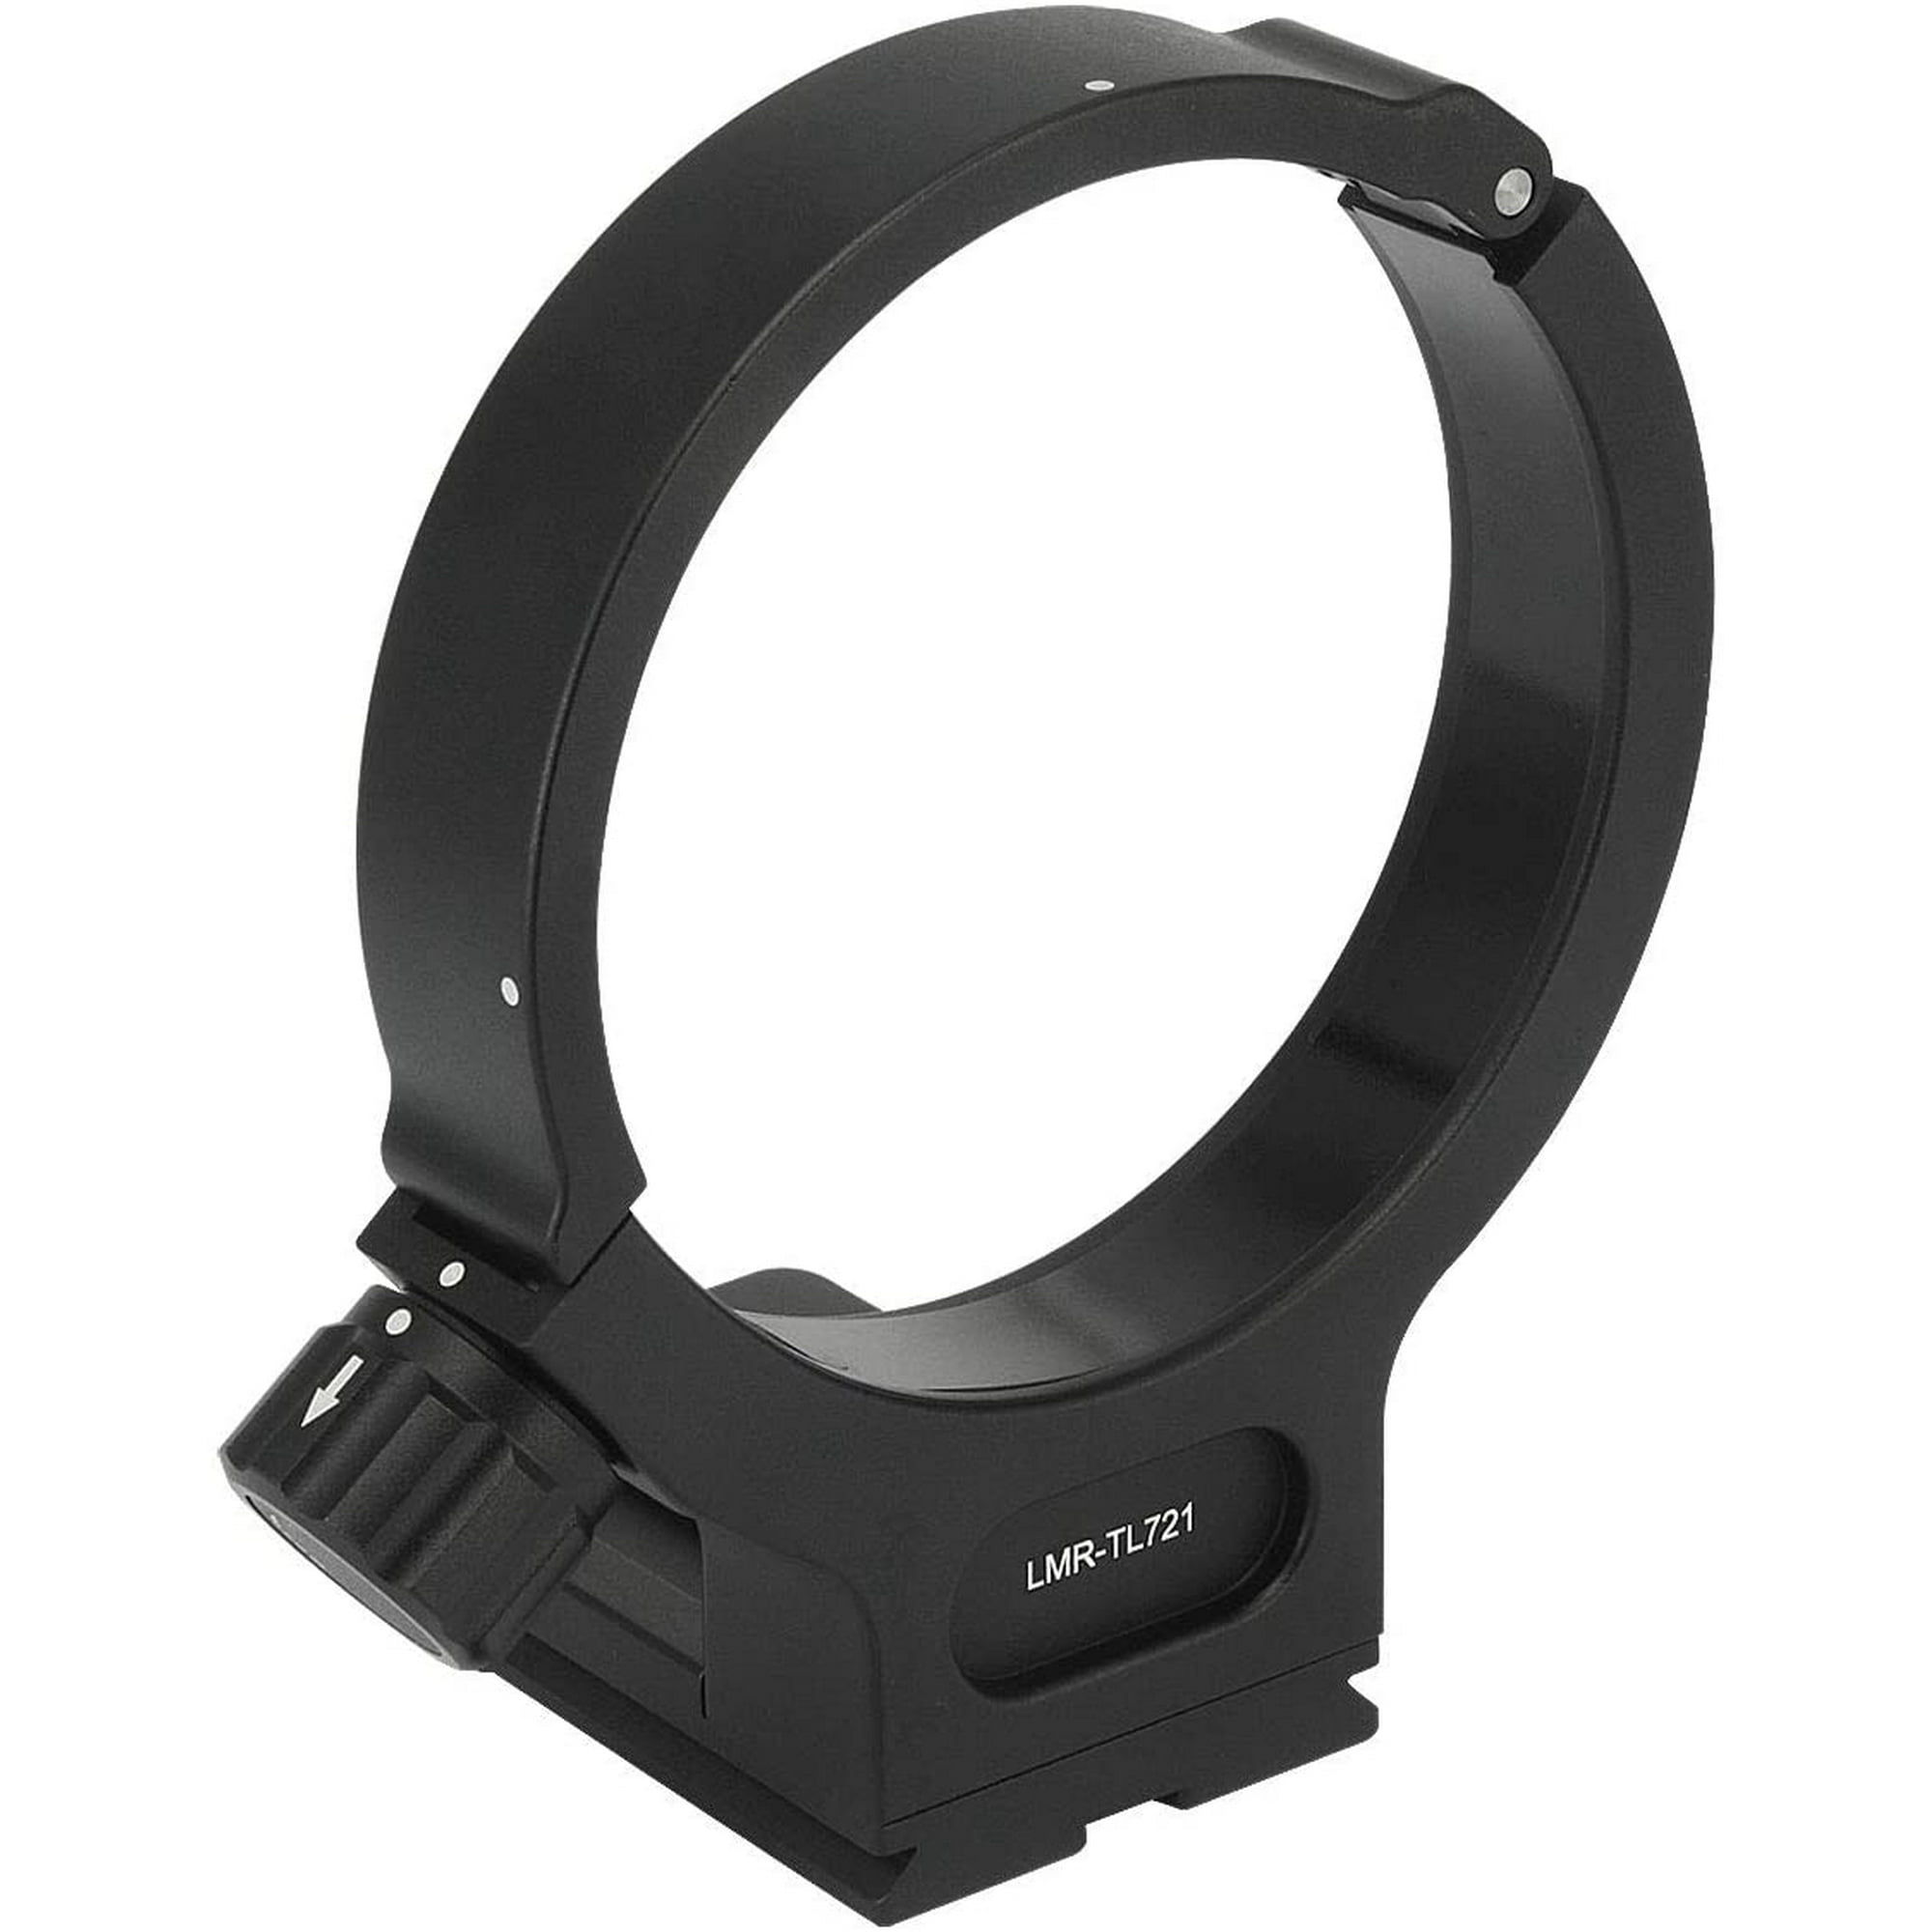 Haoge LMR-TL721 Lens Collar Replacement Foot Tripod Mount Ring